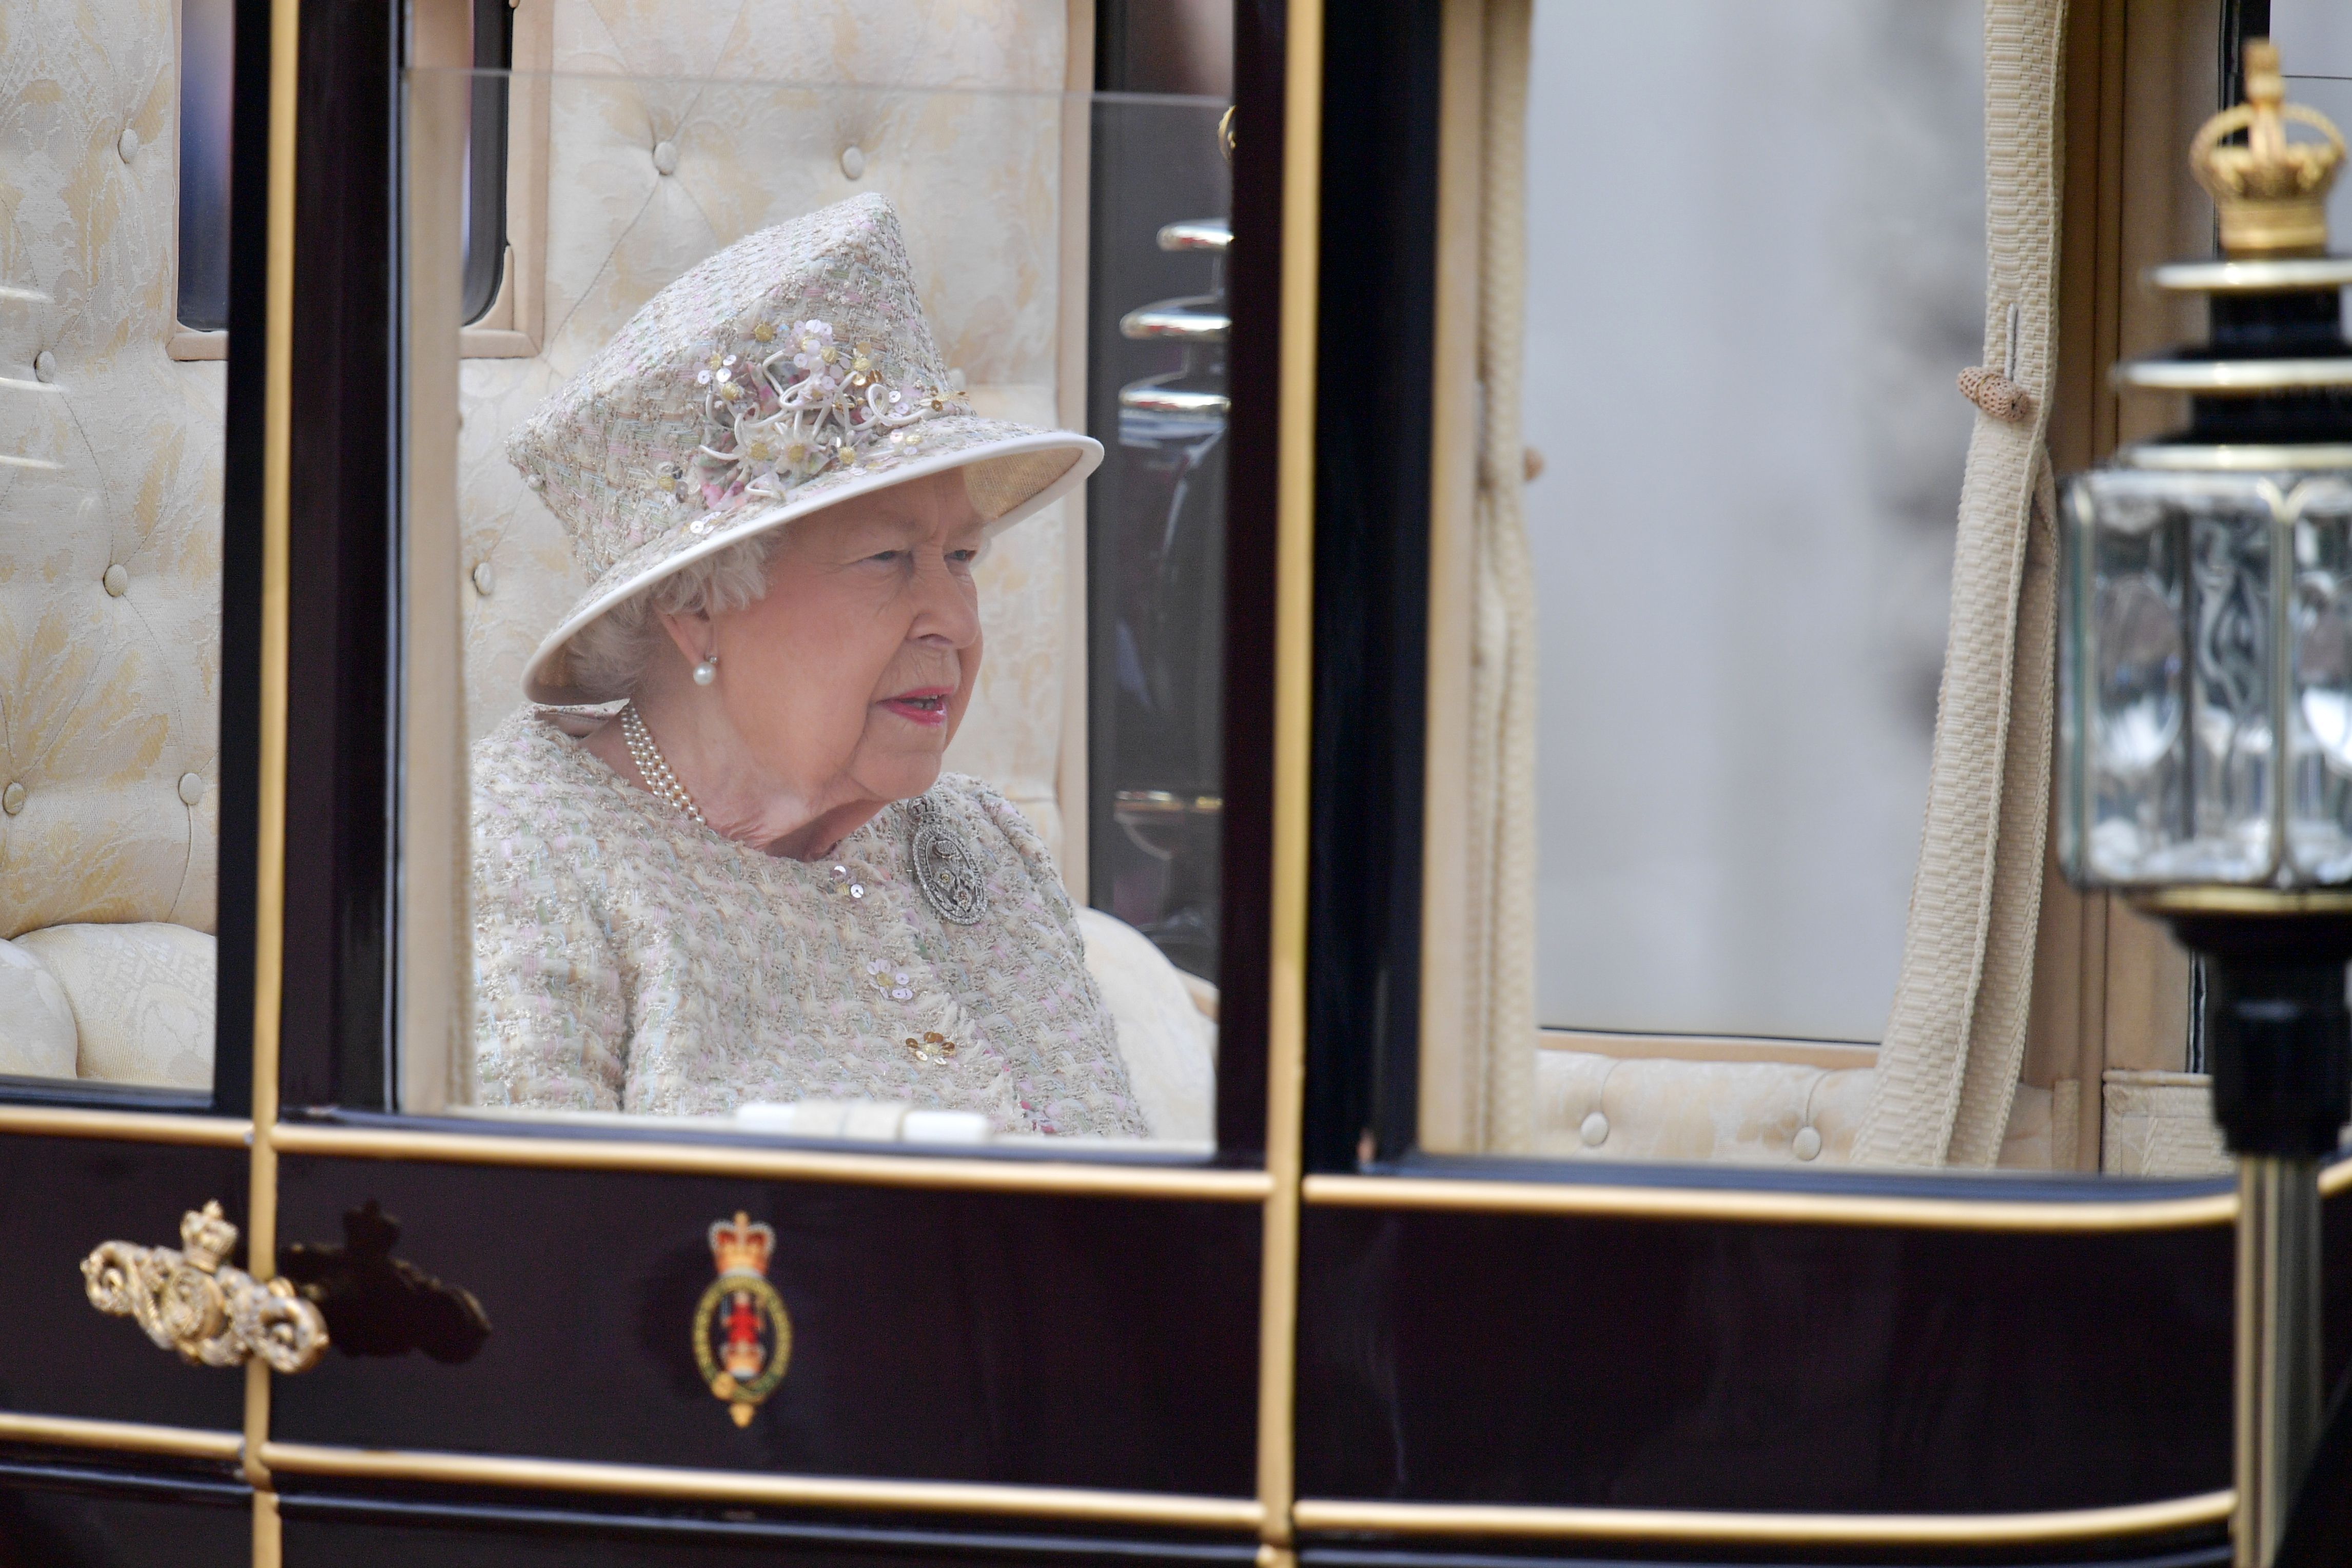 Did You Know That Queen Elizabeth Has Two Birthdays Every Single Year?